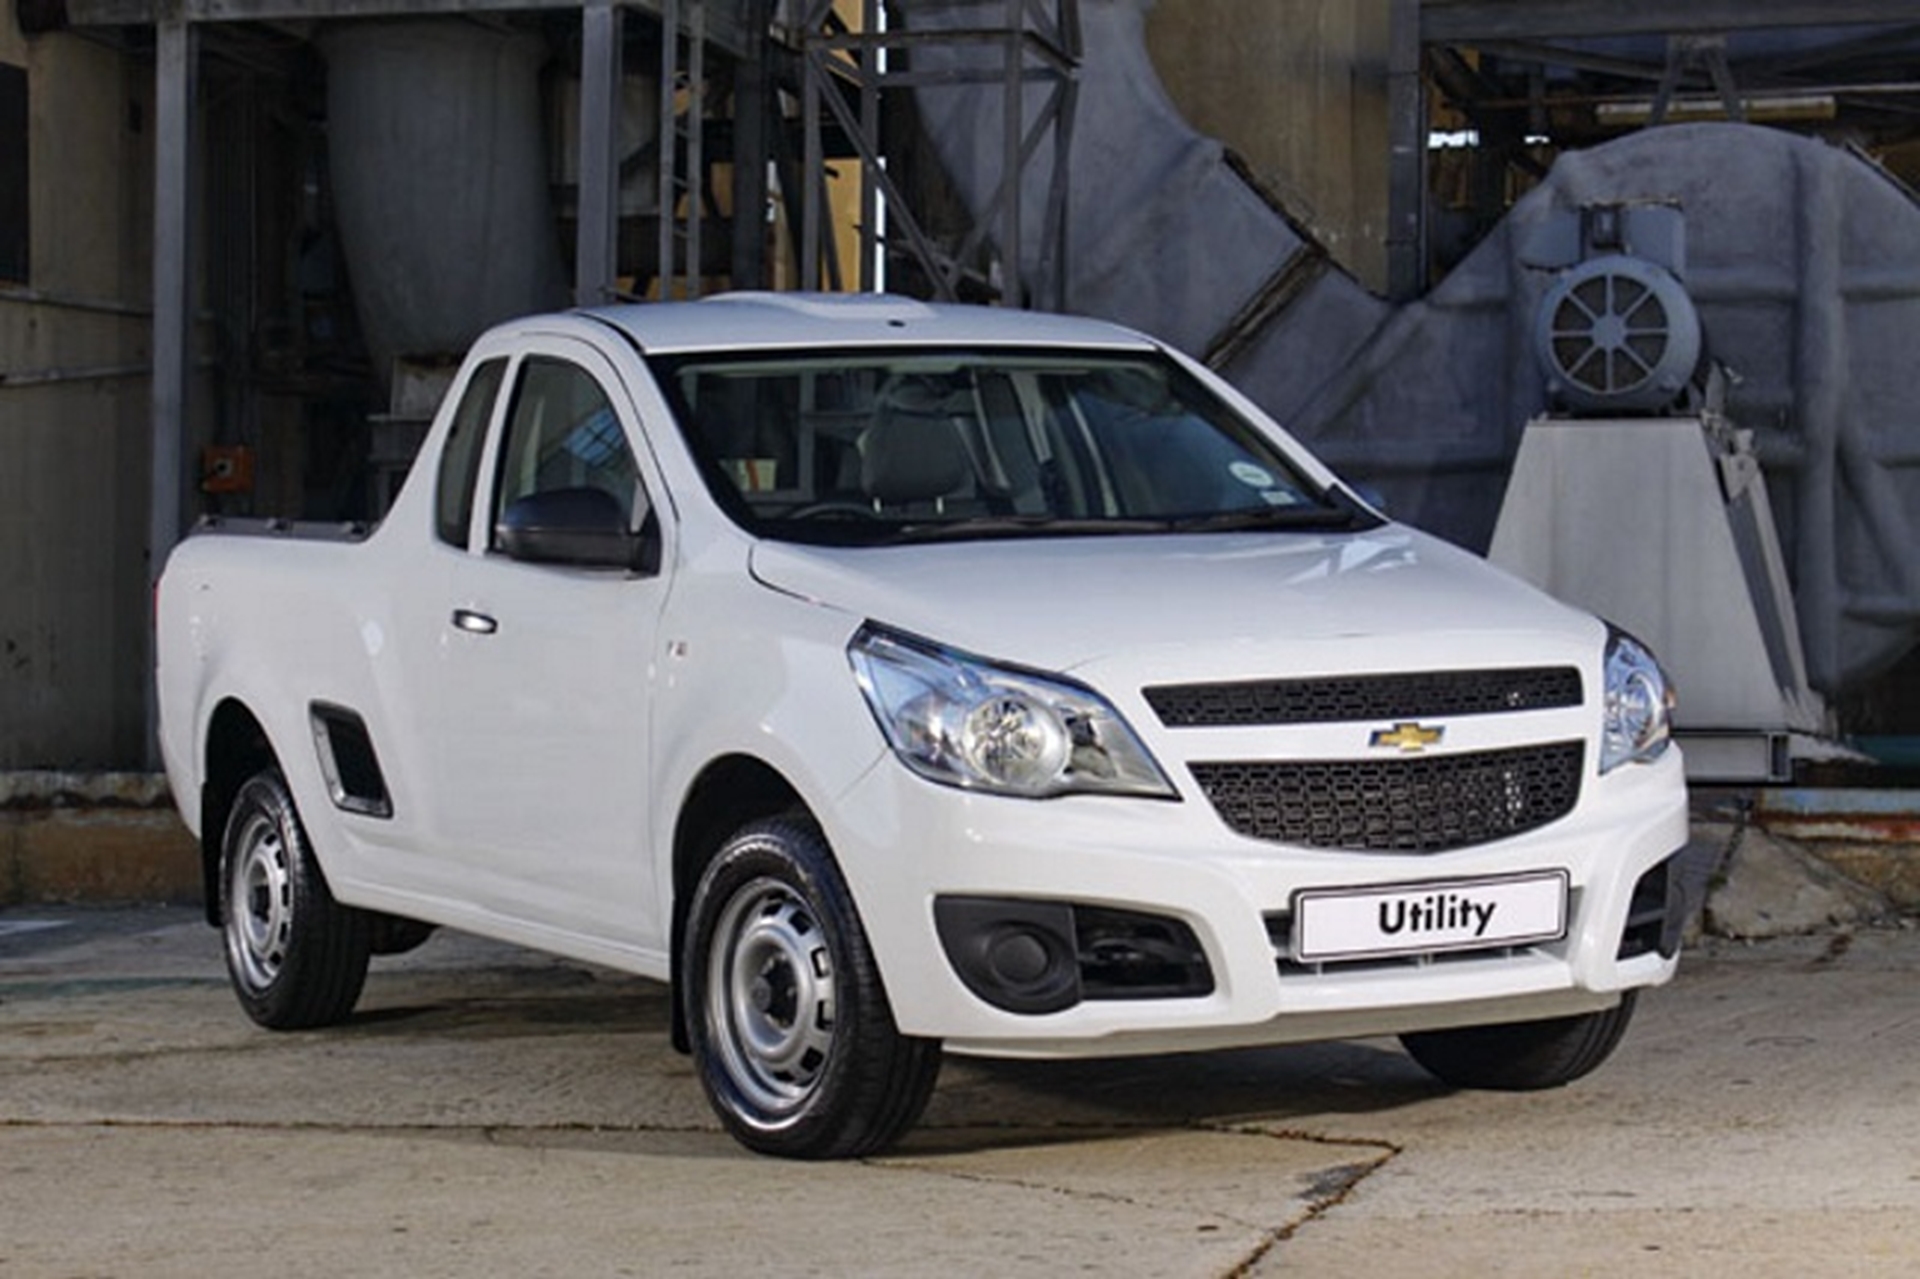 Autoworld unveils Chevrolet Sonic and Chevrolet Utility at Zimbabwe Motor Show